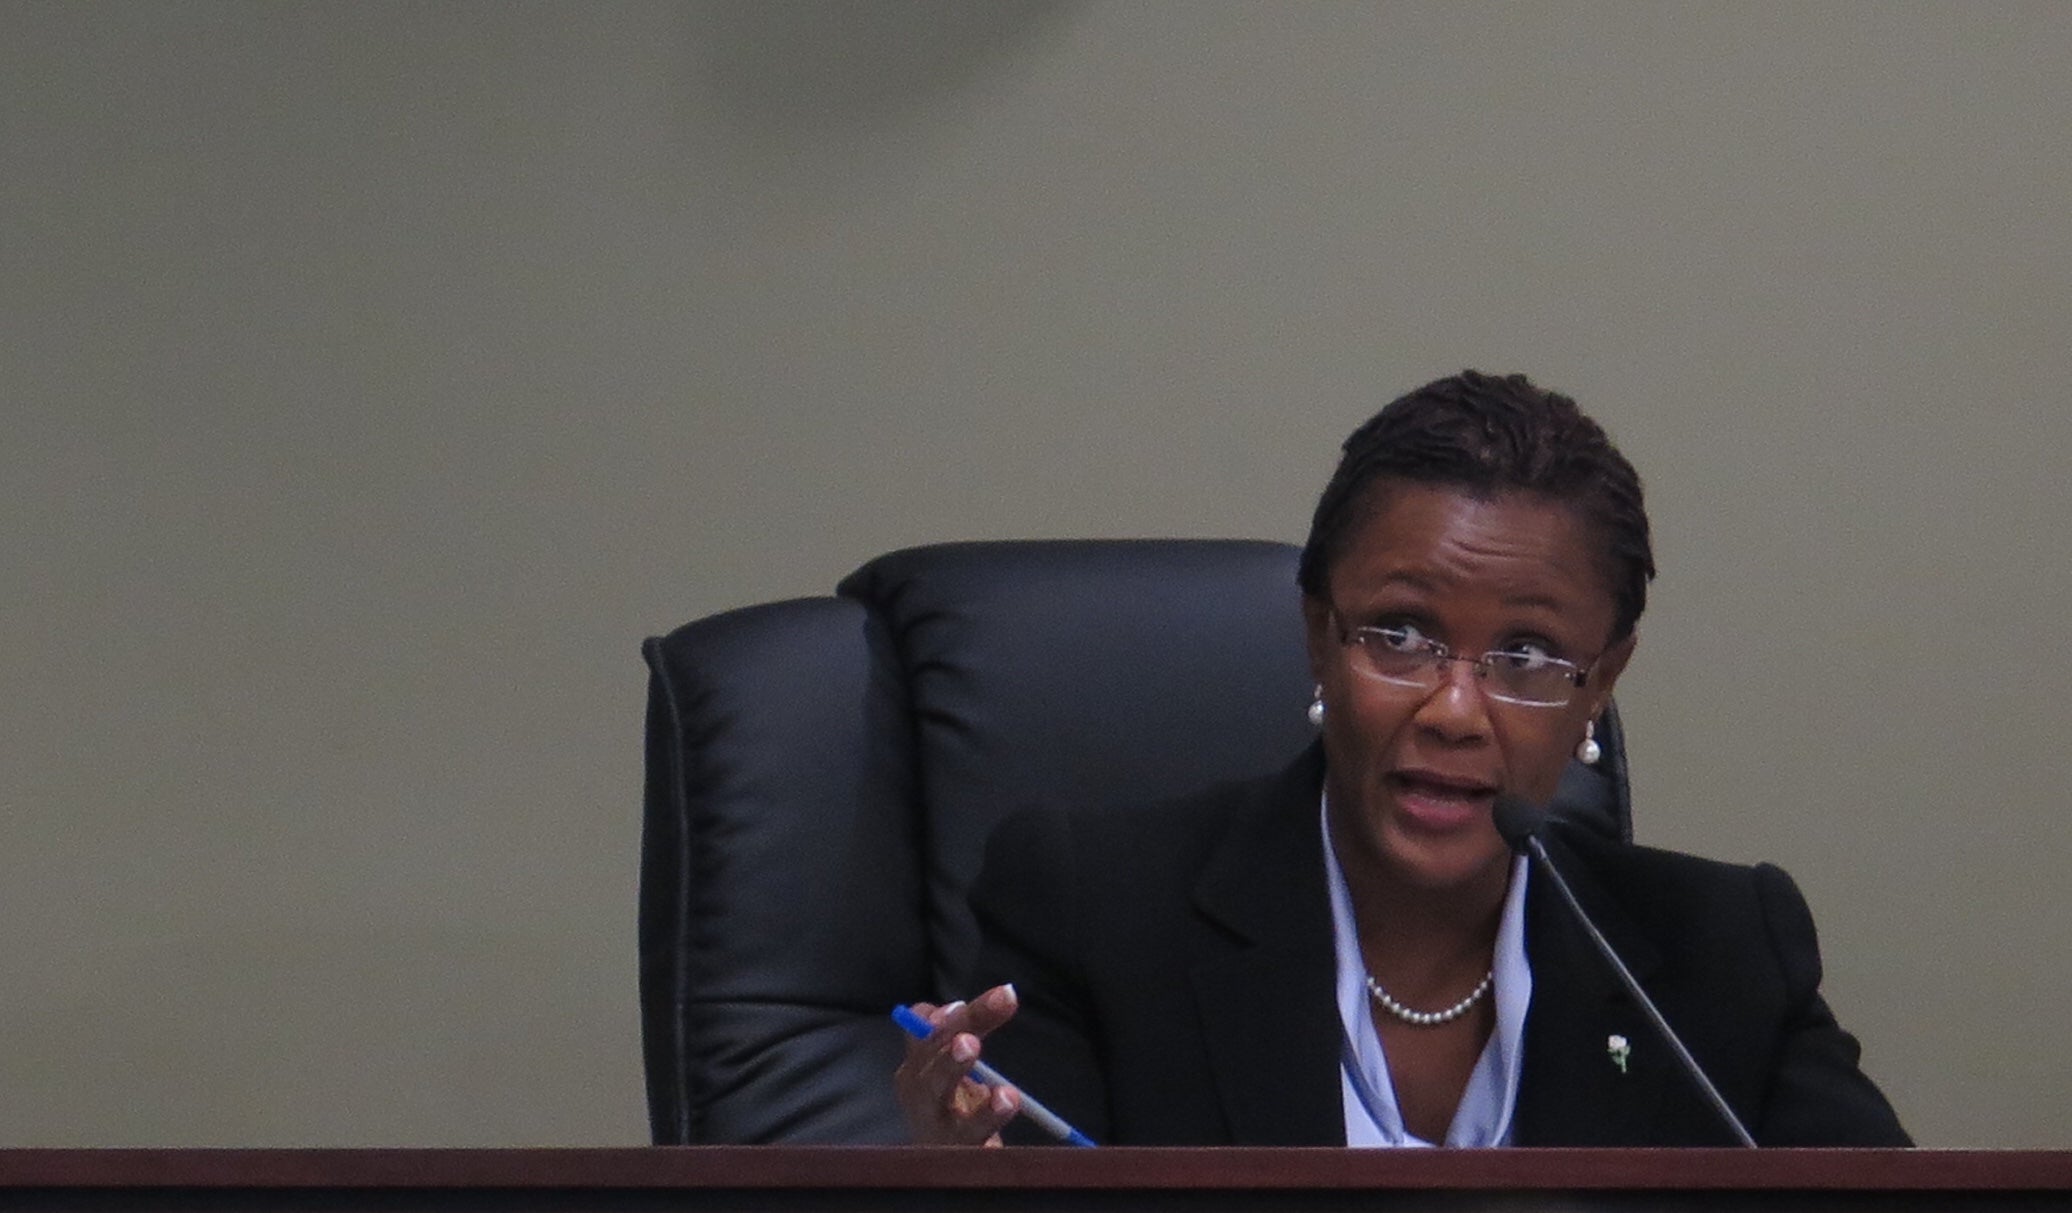 Mayor Kim Bracey asks questions during a budget hearing. (Emily Previti/WITF)